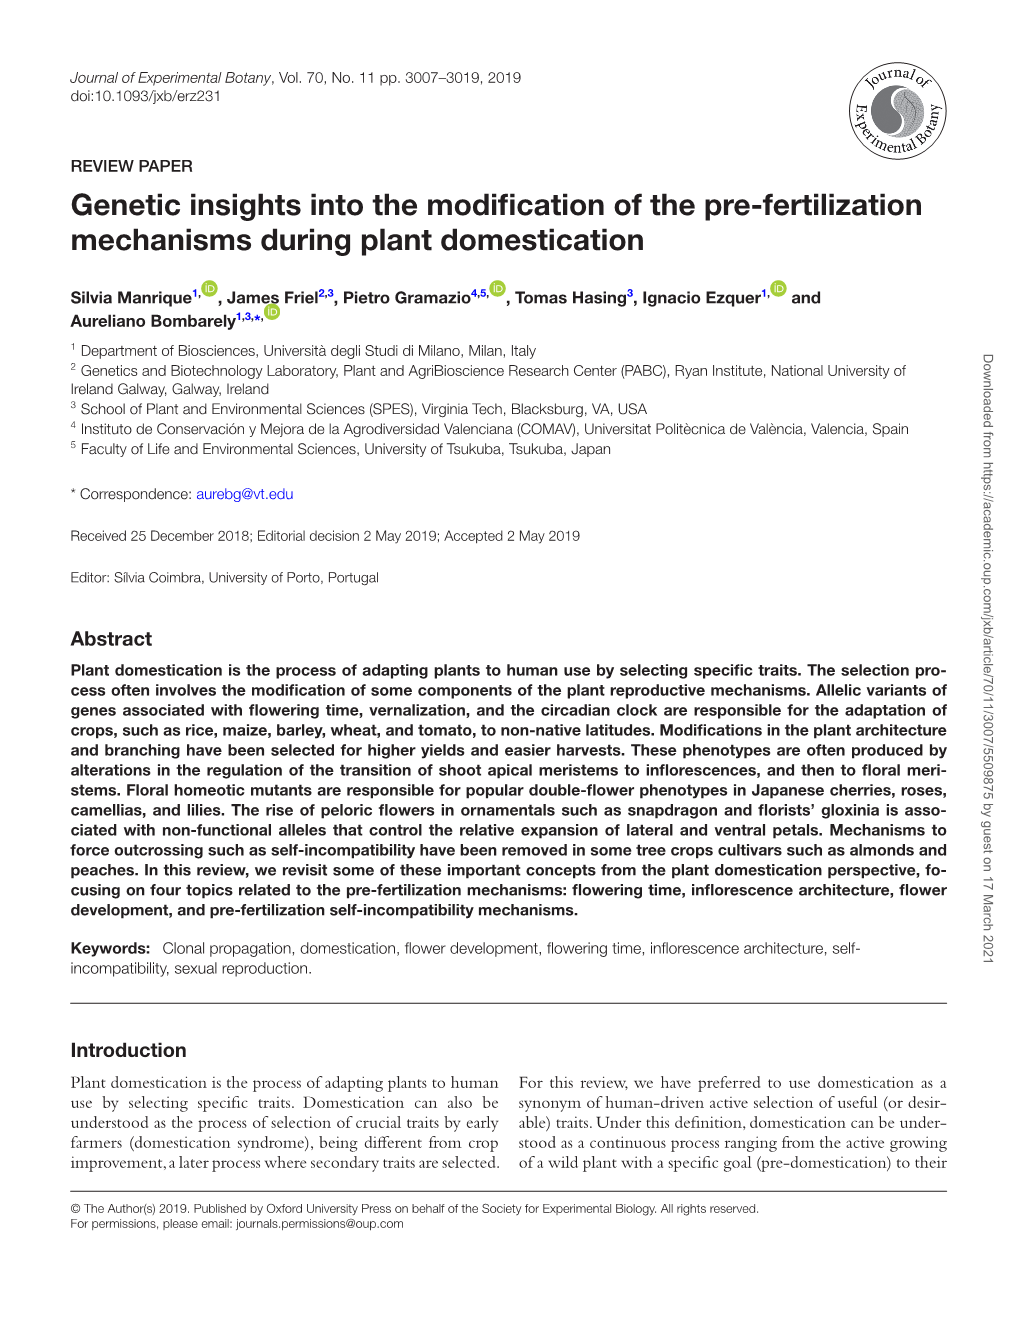 Genetic Insights Into the Modification of the Pre-Fertilization Mechanisms During Plant Domestication